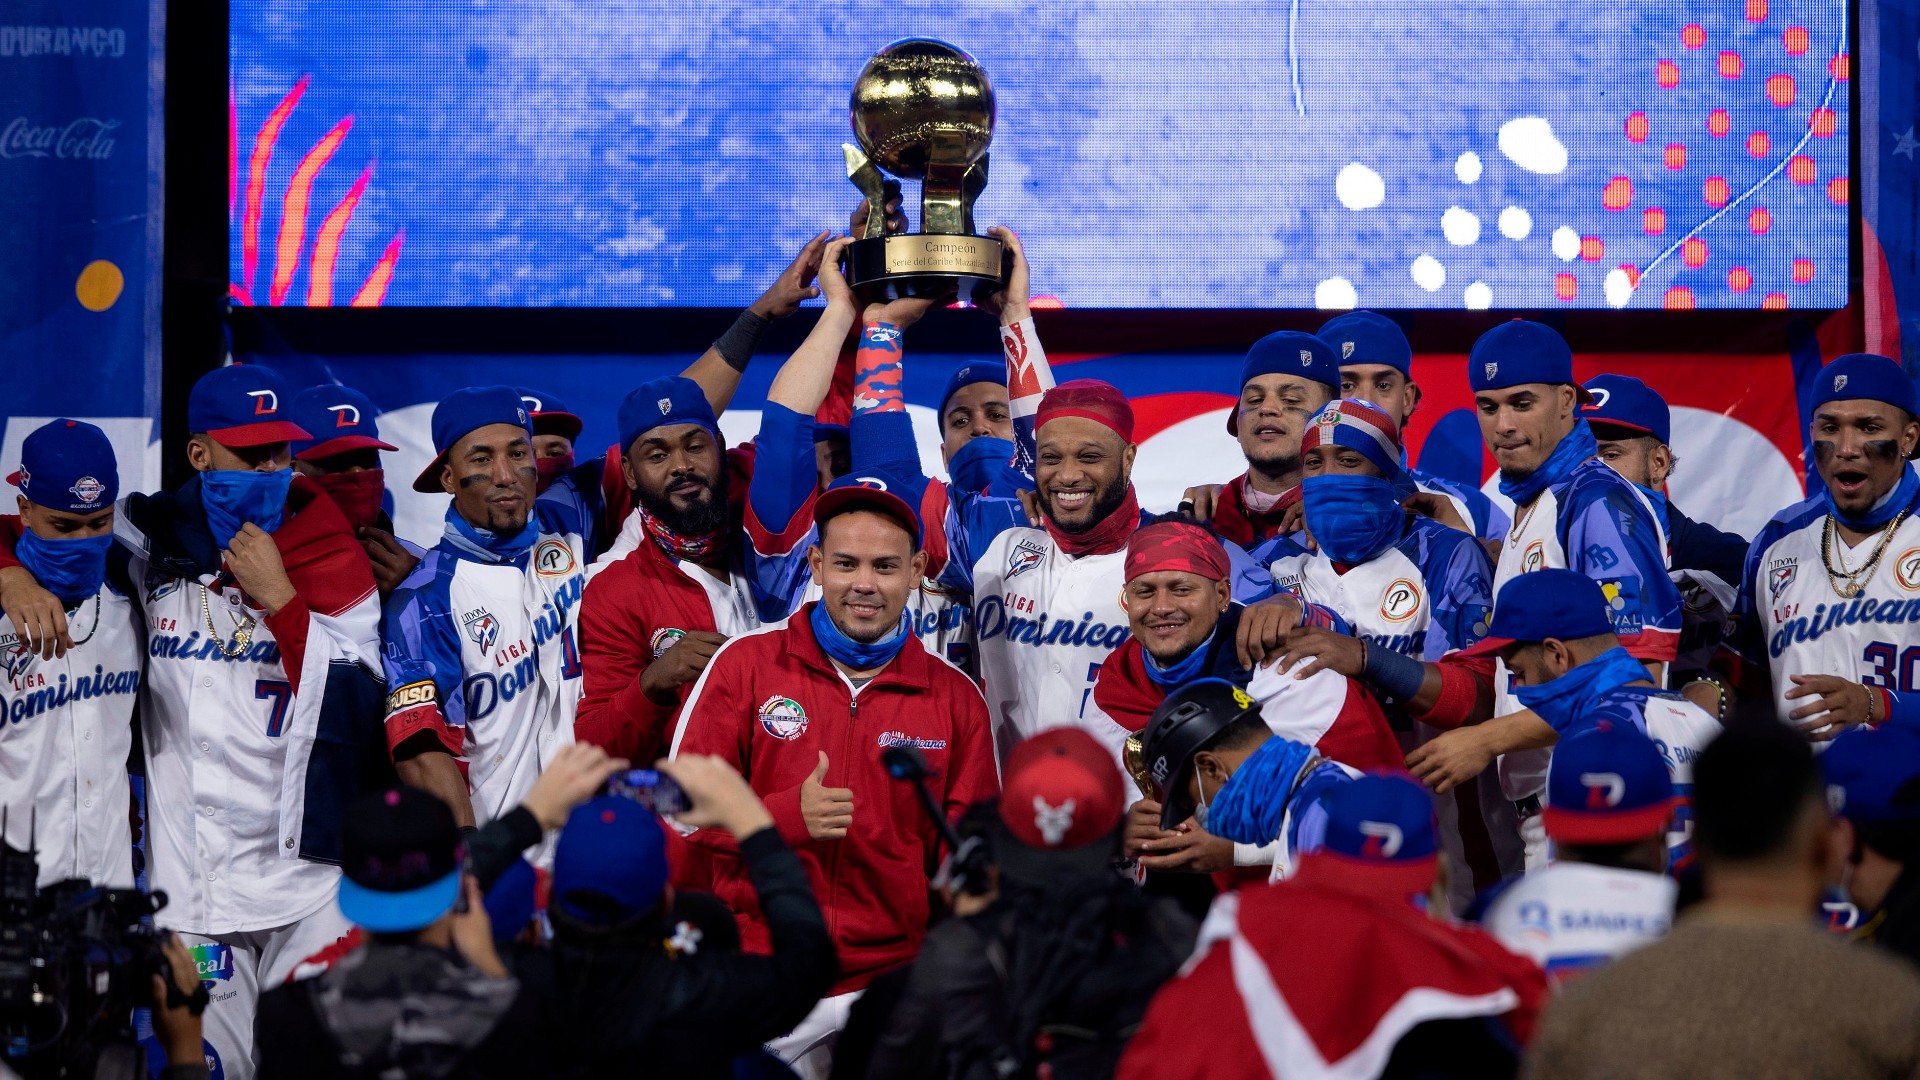 Caribbean Series 2022: Full schedule, TV channel, scores for baseball's Serie del Caribe